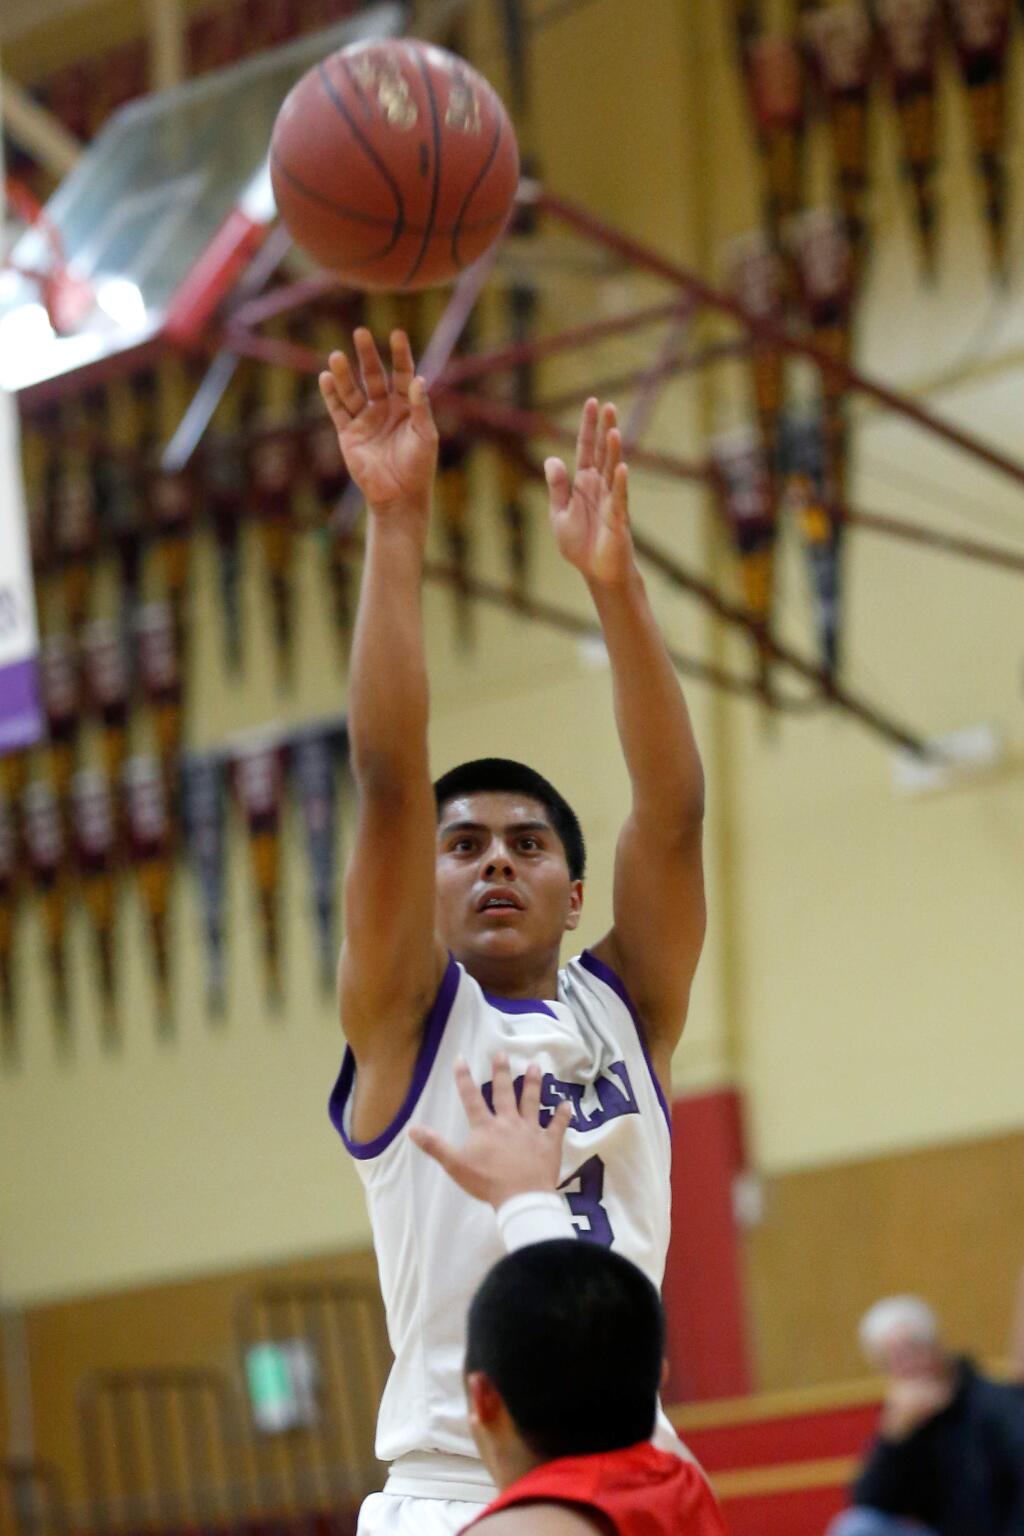 Roseland Prep's Pablo Avendano (3) shoots the ball during a game in December 2015. Avendano was selected by league coaches as the 2016 NCL II All-League Boys Basketball Most Valuable Player. (Alvin Jornada / The Press Democrat)